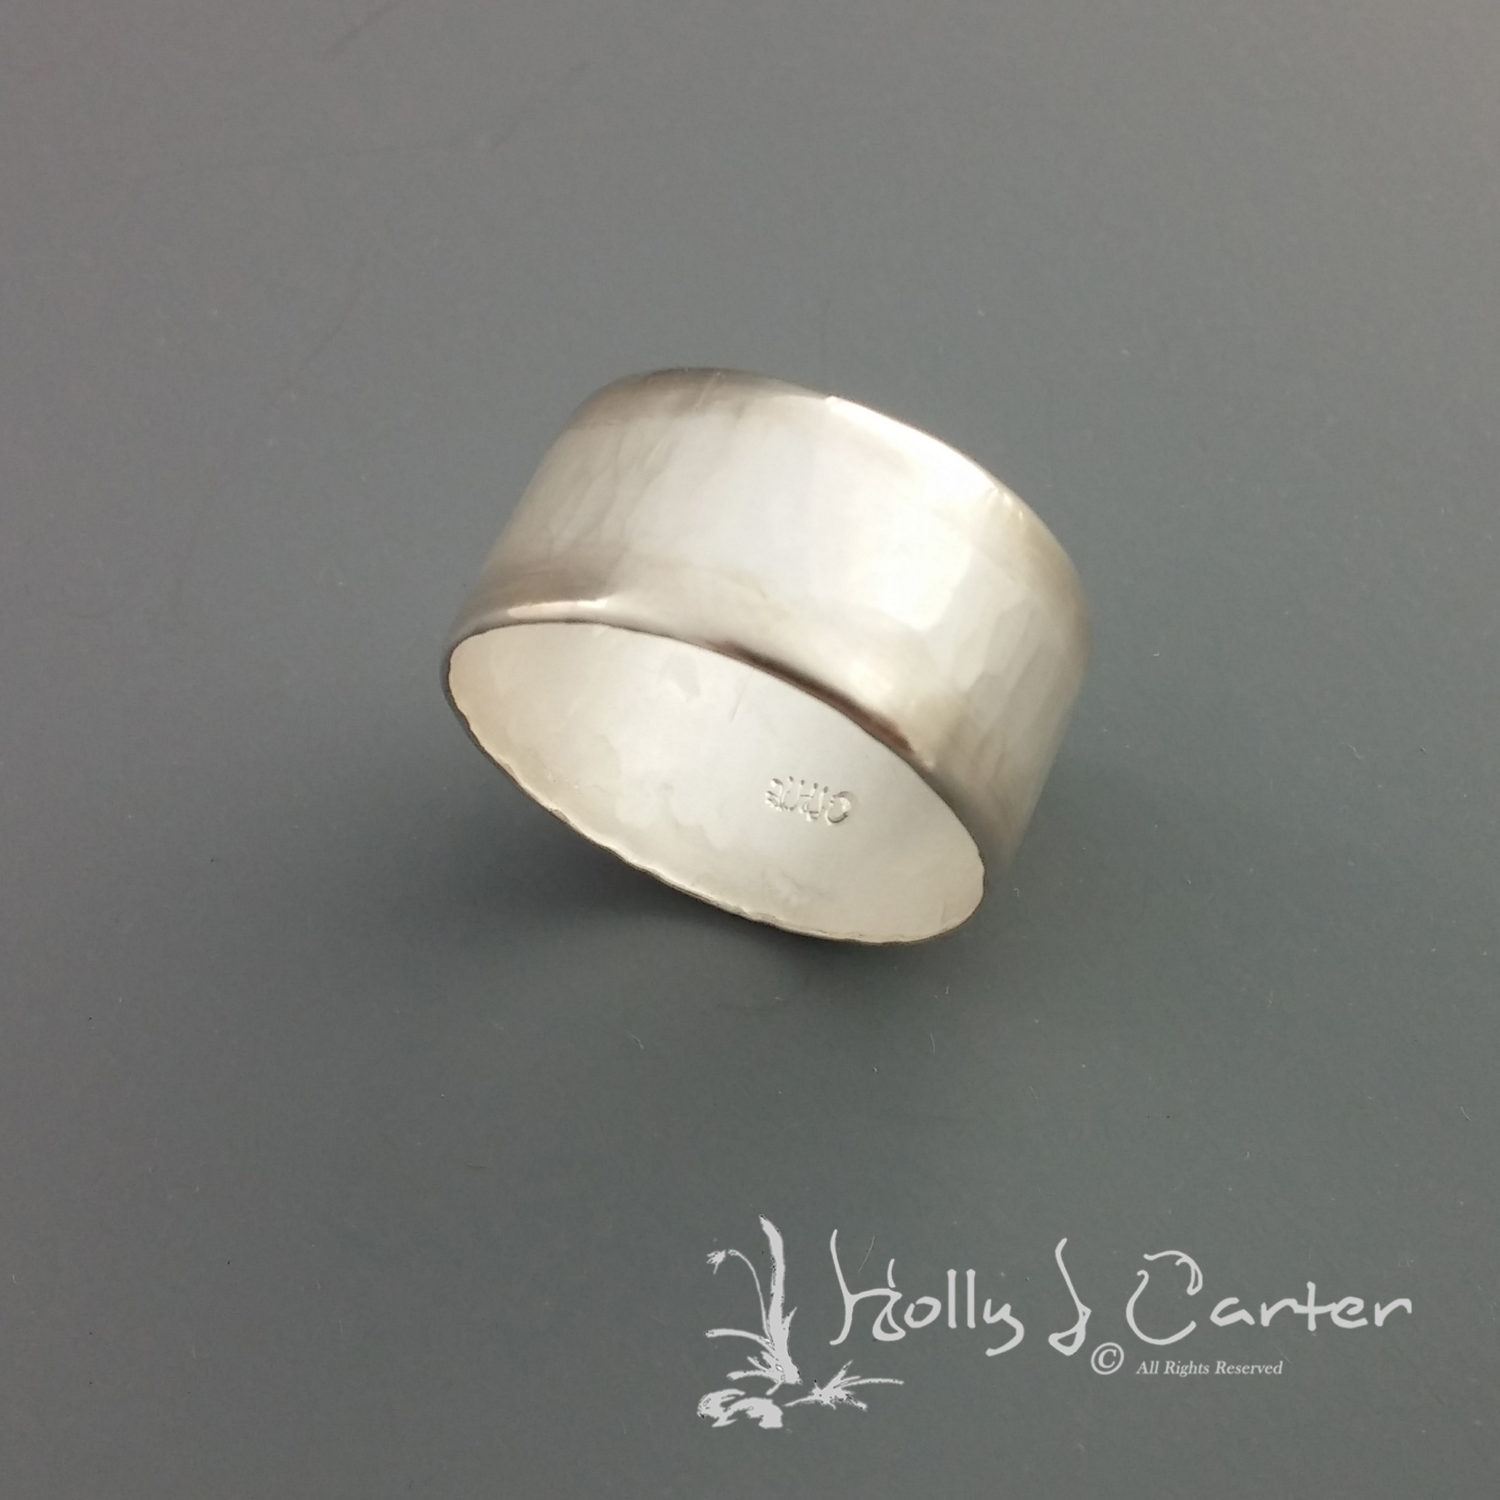 The Hammered Line Sterling Silver Ring by Holly J Carter